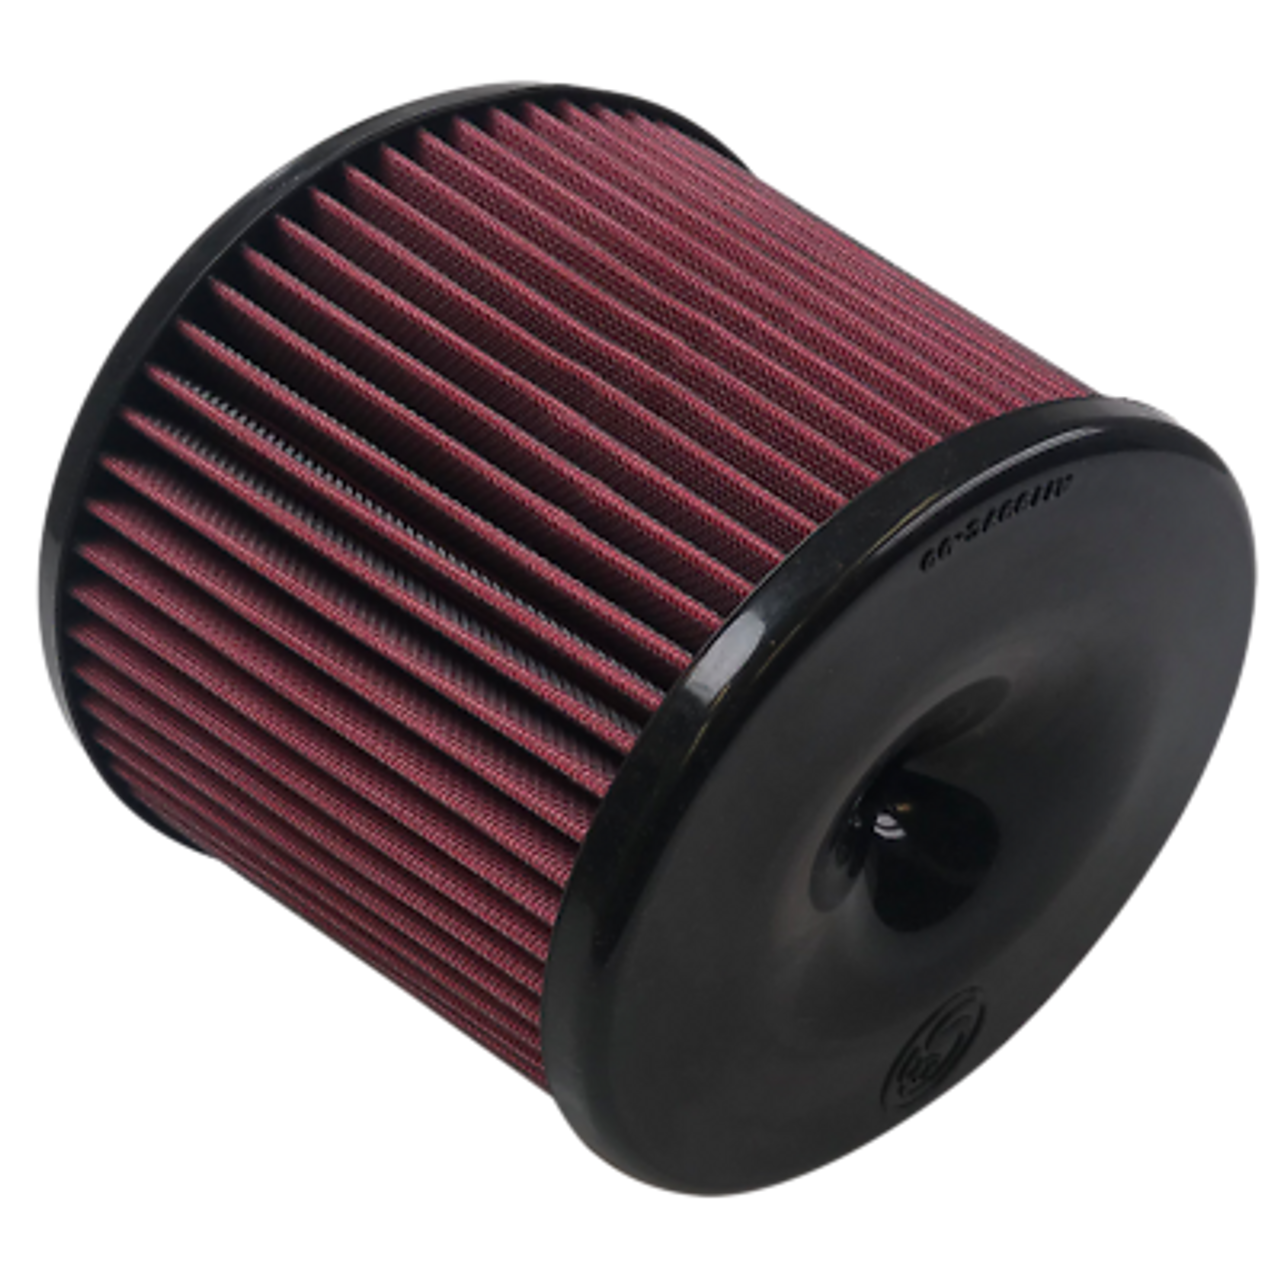 S&B COLD AIR INTAKE REPLACEMENT OILED FILTER COTTON CLEANABLE WASHABLE KF-1056